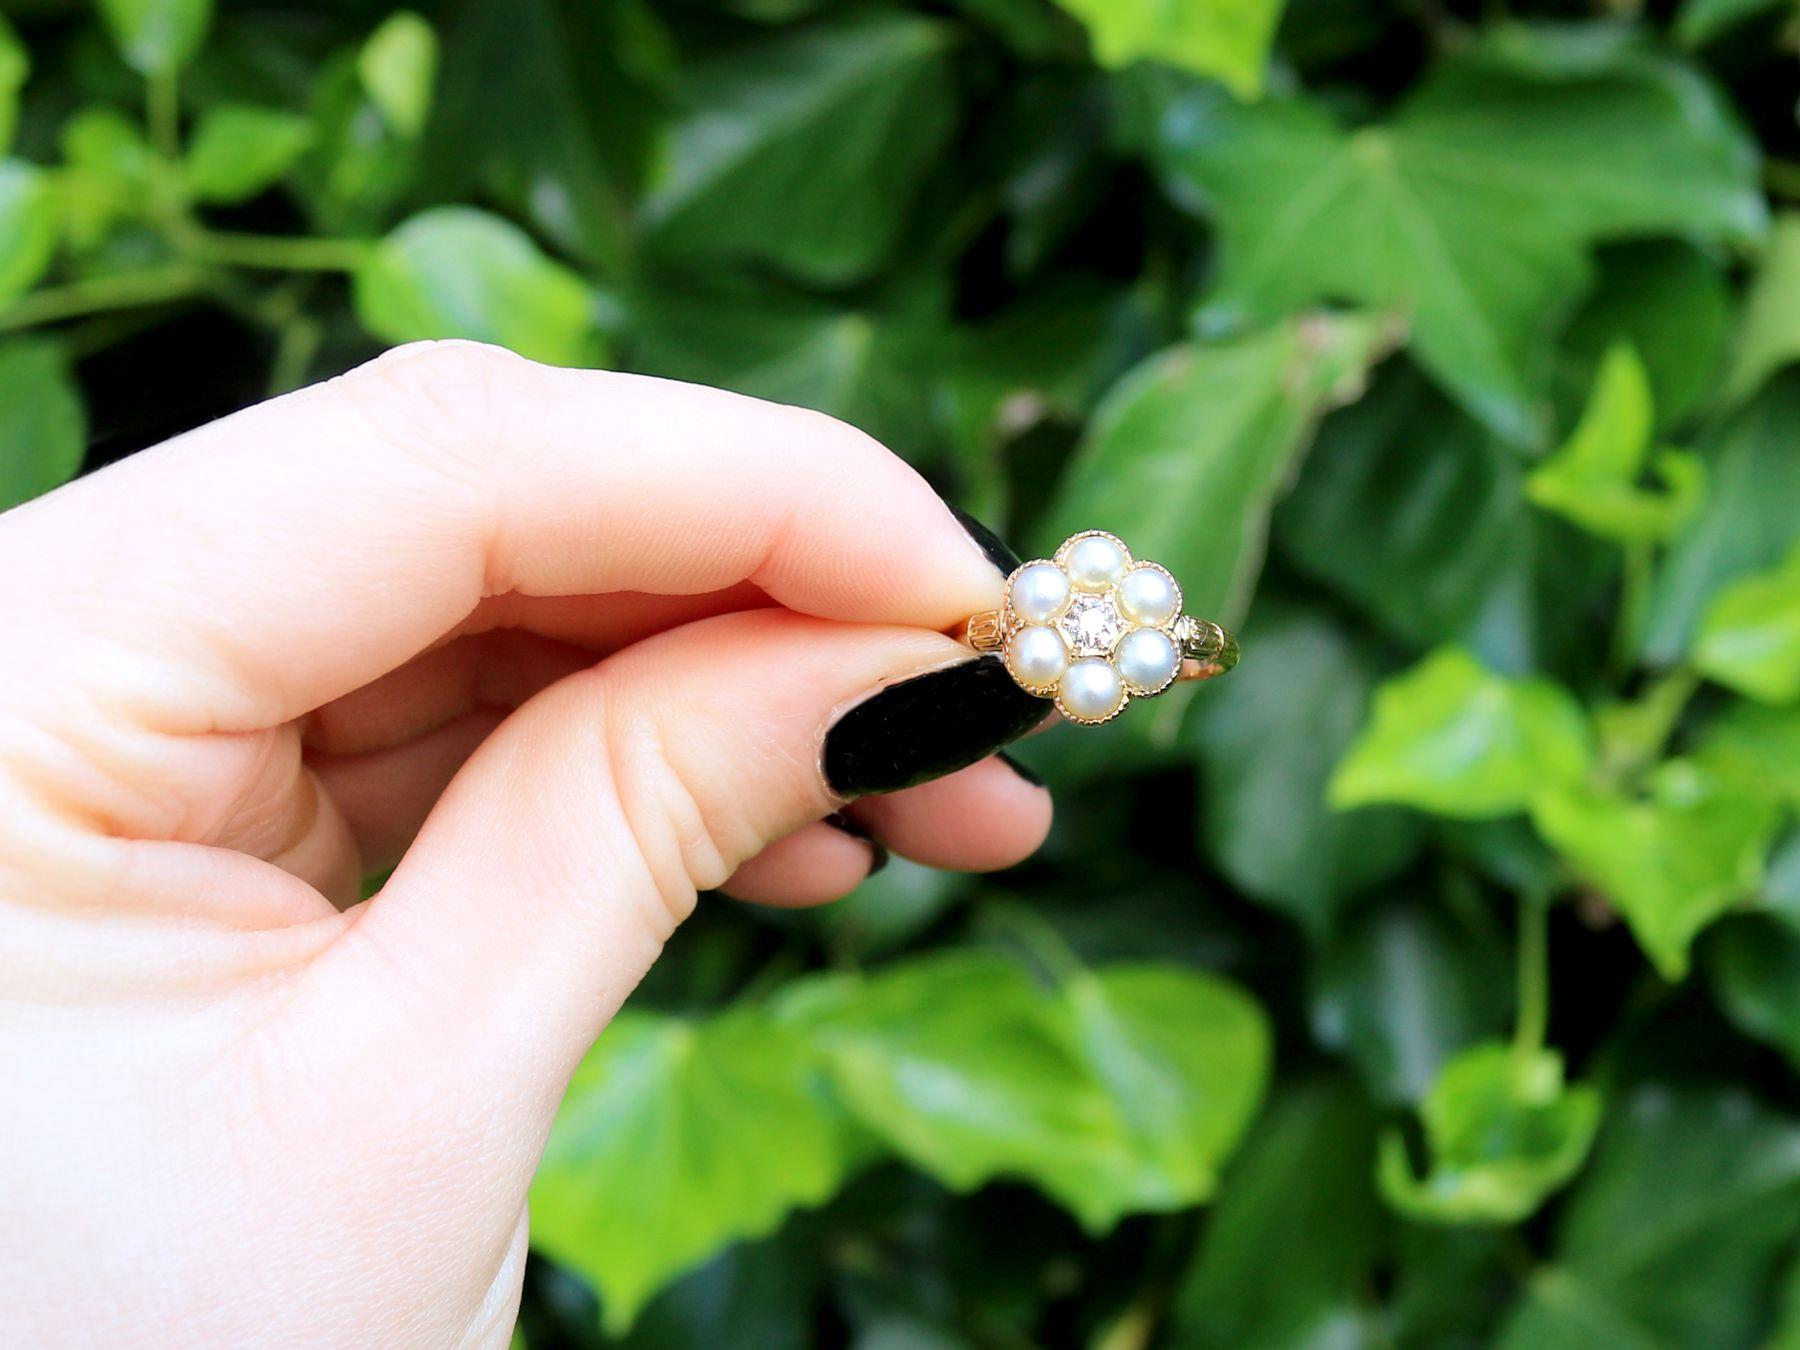 A stunning, fine and impressive natural pearl and 0.20 carat diamond, 18 karat yellow gold floral cluster ring; part of our diverse antique jewelry collections

This stunning, fine and impressive antique pearl ring has been crafted in 18k yellow